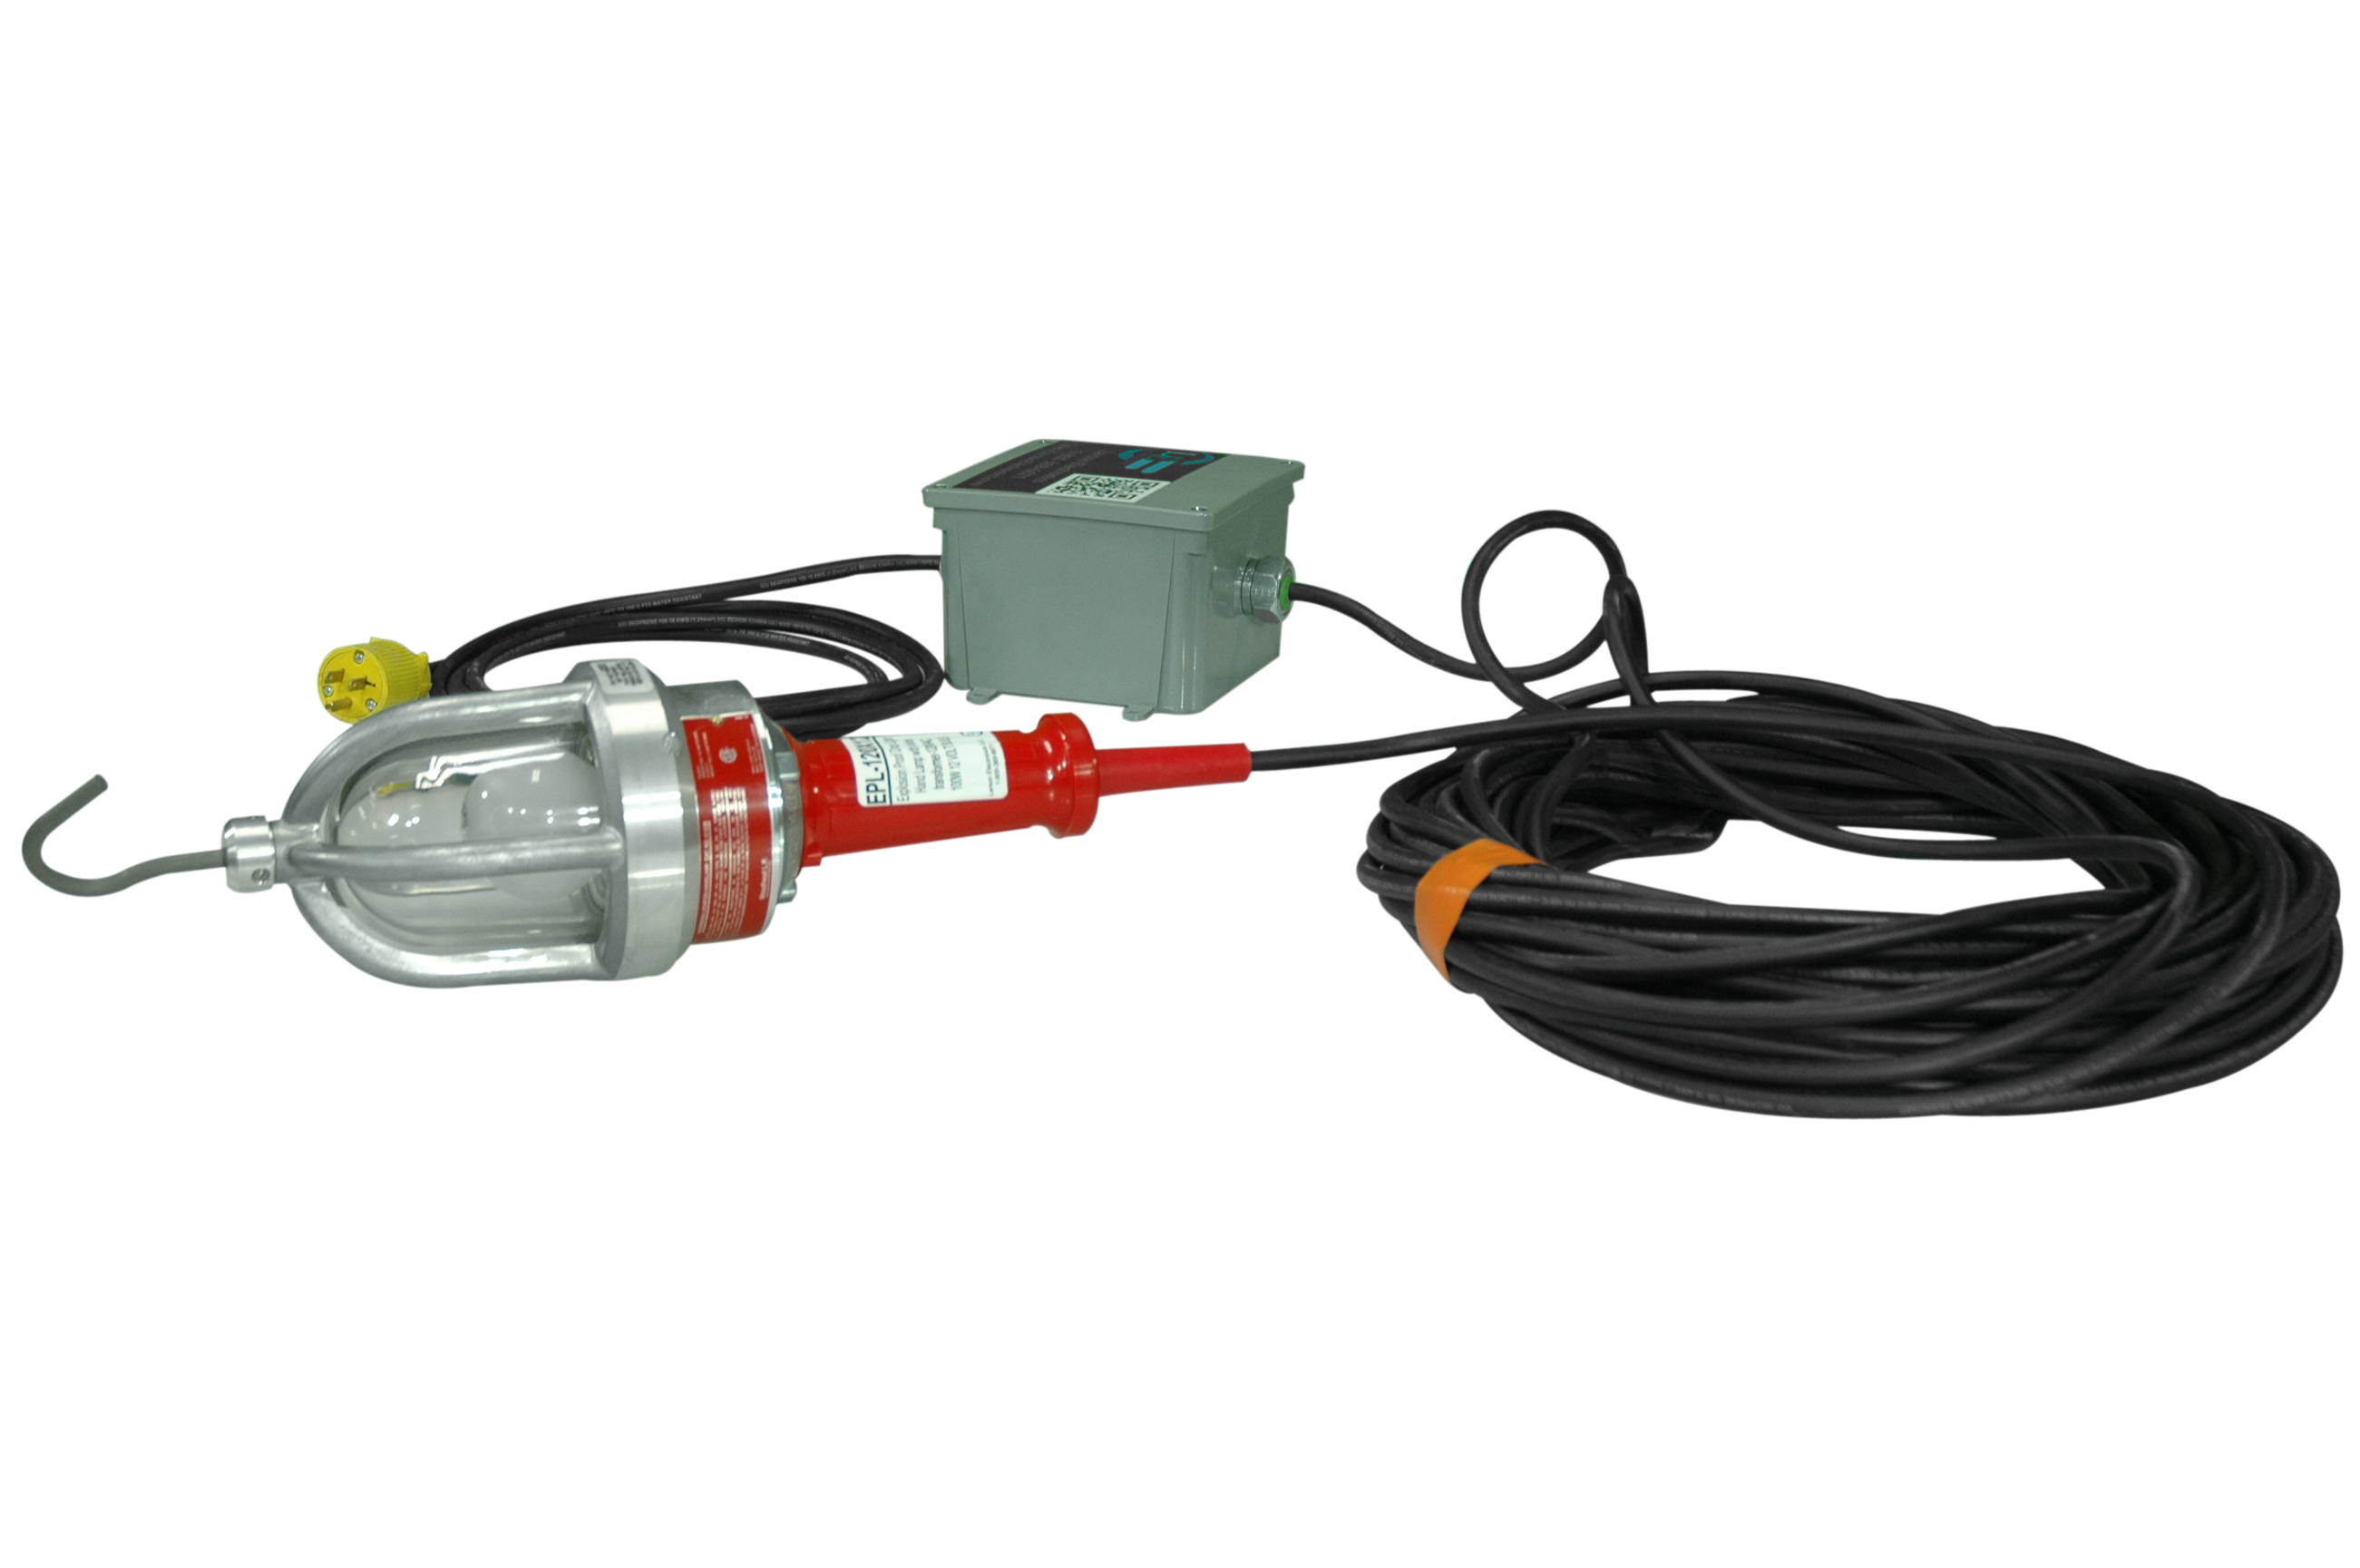 Class 1 Division 1 Explosion Proof Drop Light with 25' Cord